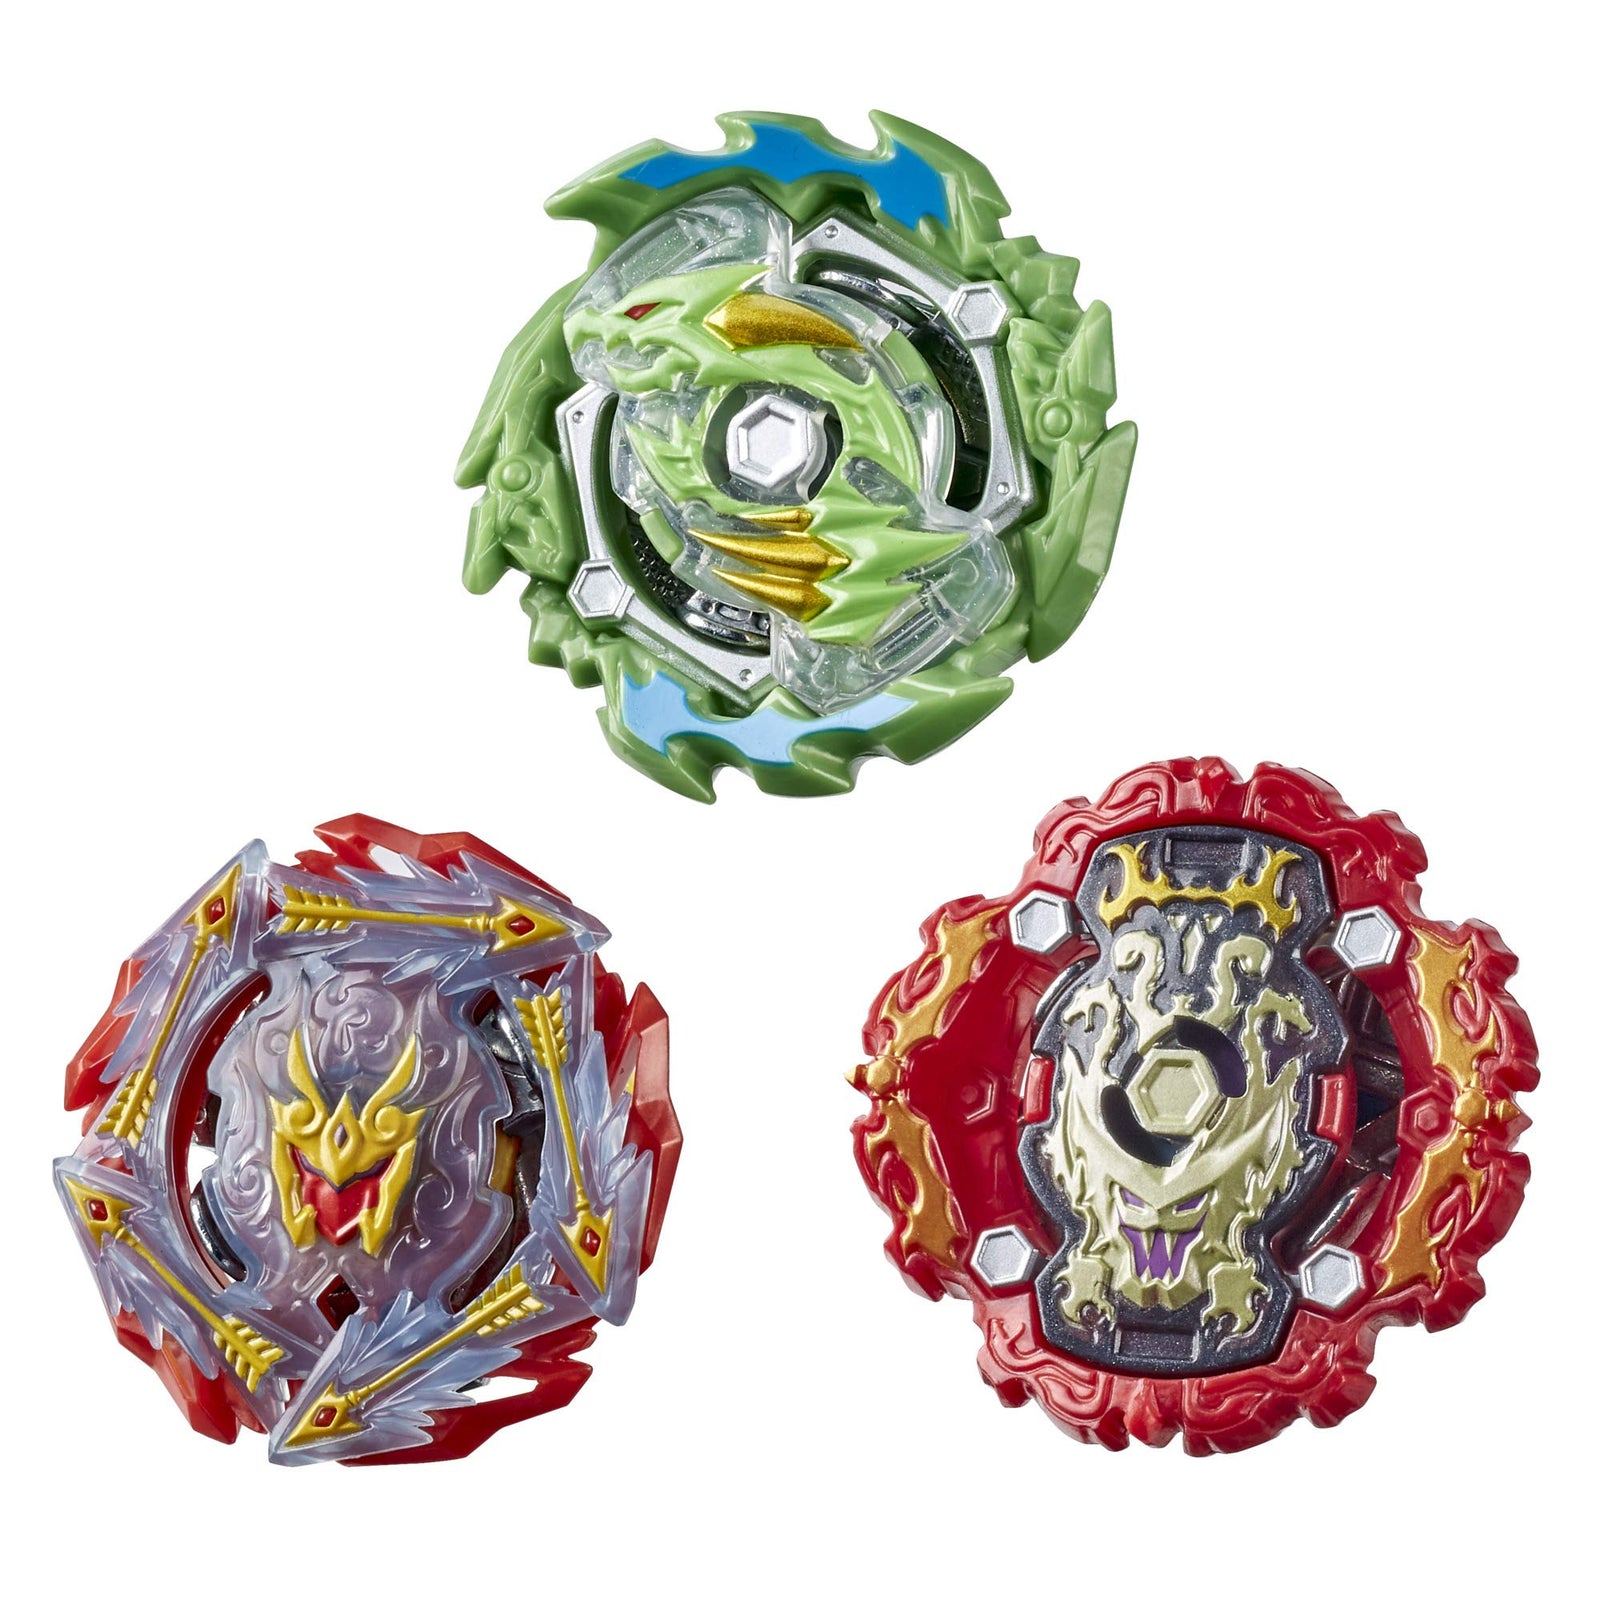 Beyblade Burst Rise Hypersphere Battle Heroes 3-Pack -- Ace Dragon D5, Rudr R5, Viper Hydrax H5 Battling Game Tops, Toys Ages 8 and Up (Amazon Exclusive)